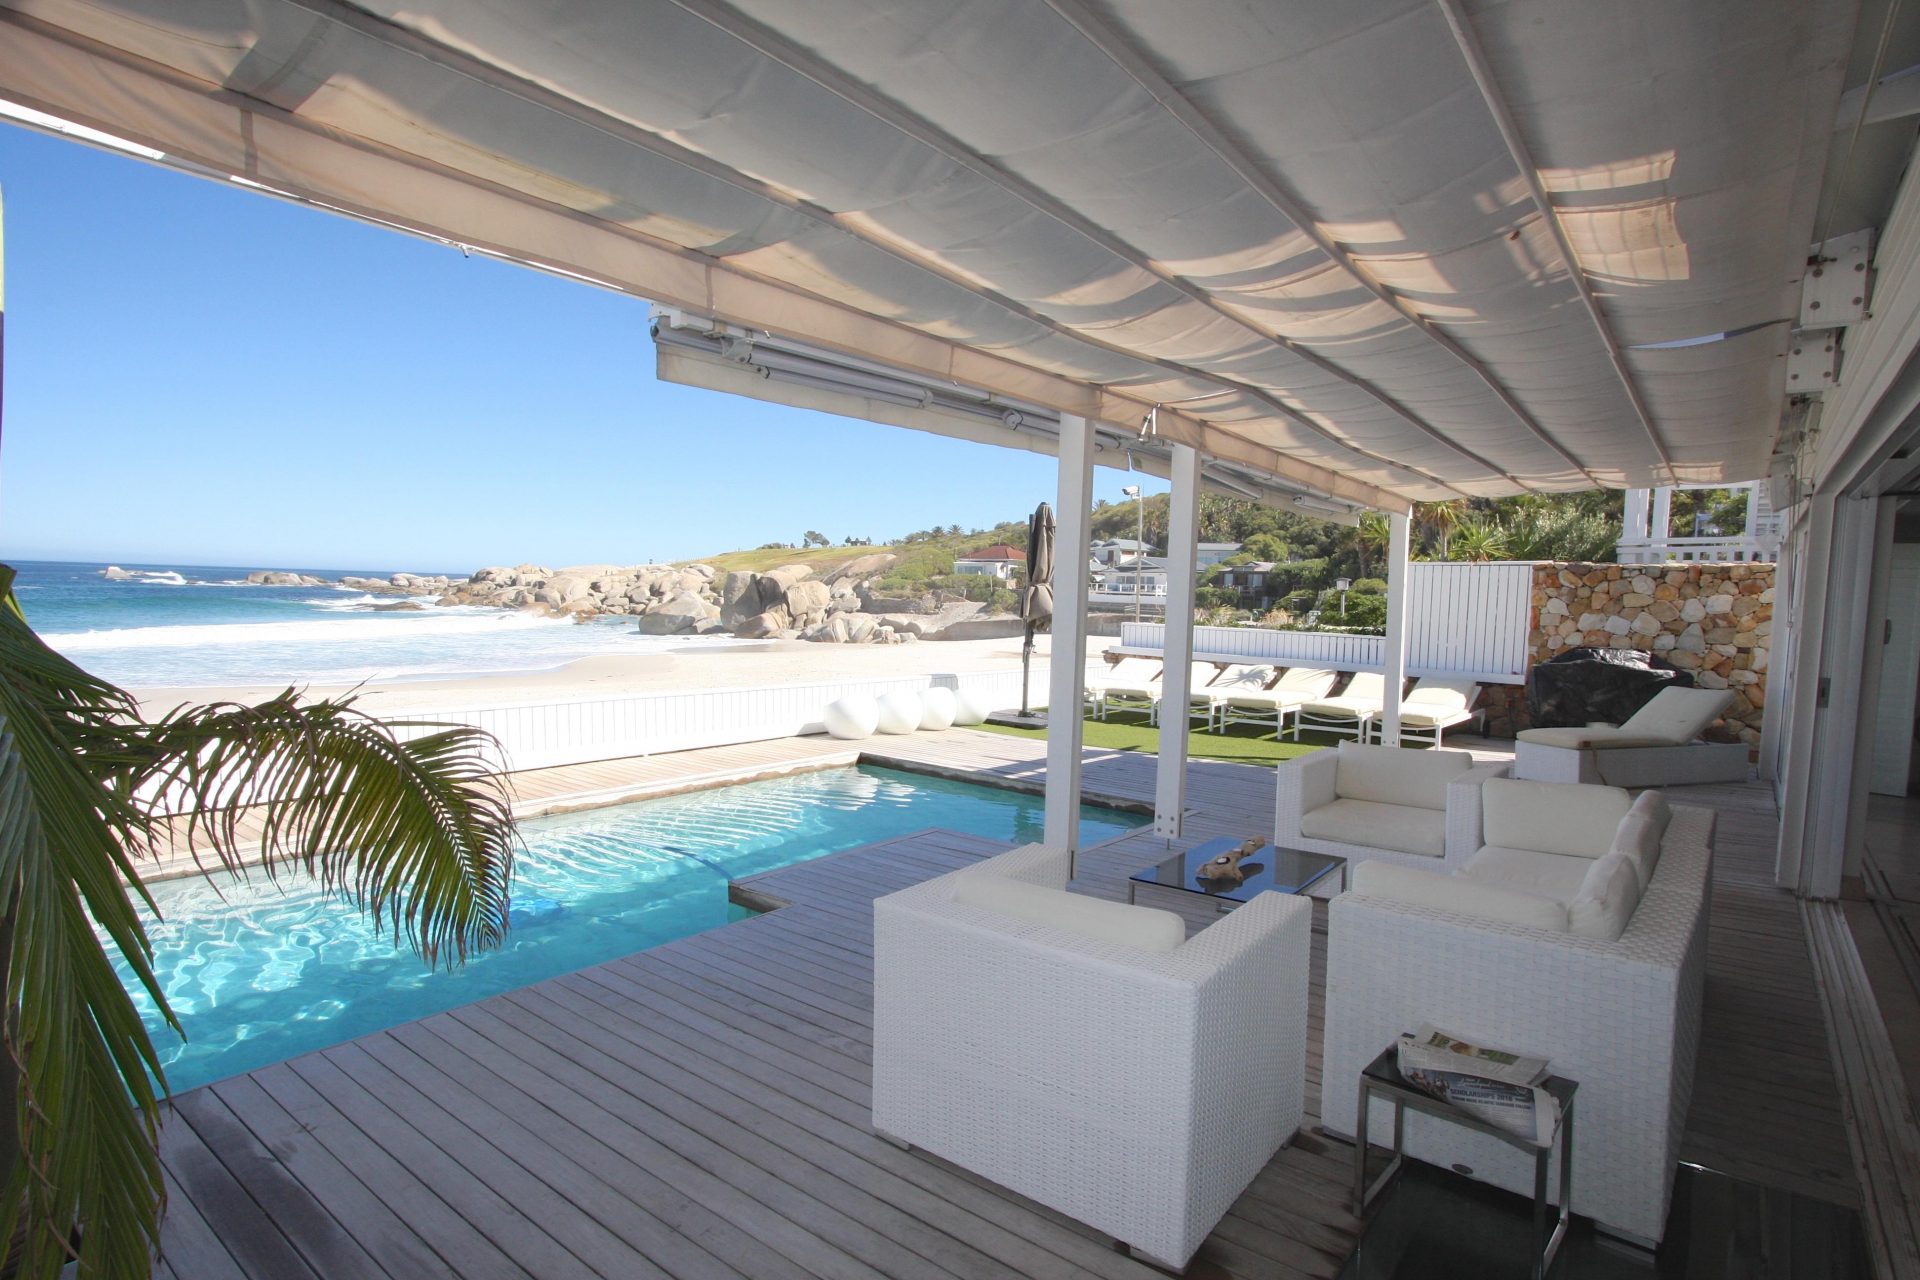 Photo 3 of Glen Beach Bungalow accommodation in Camps Bay, Cape Town with 4 bedrooms and 4 bathrooms